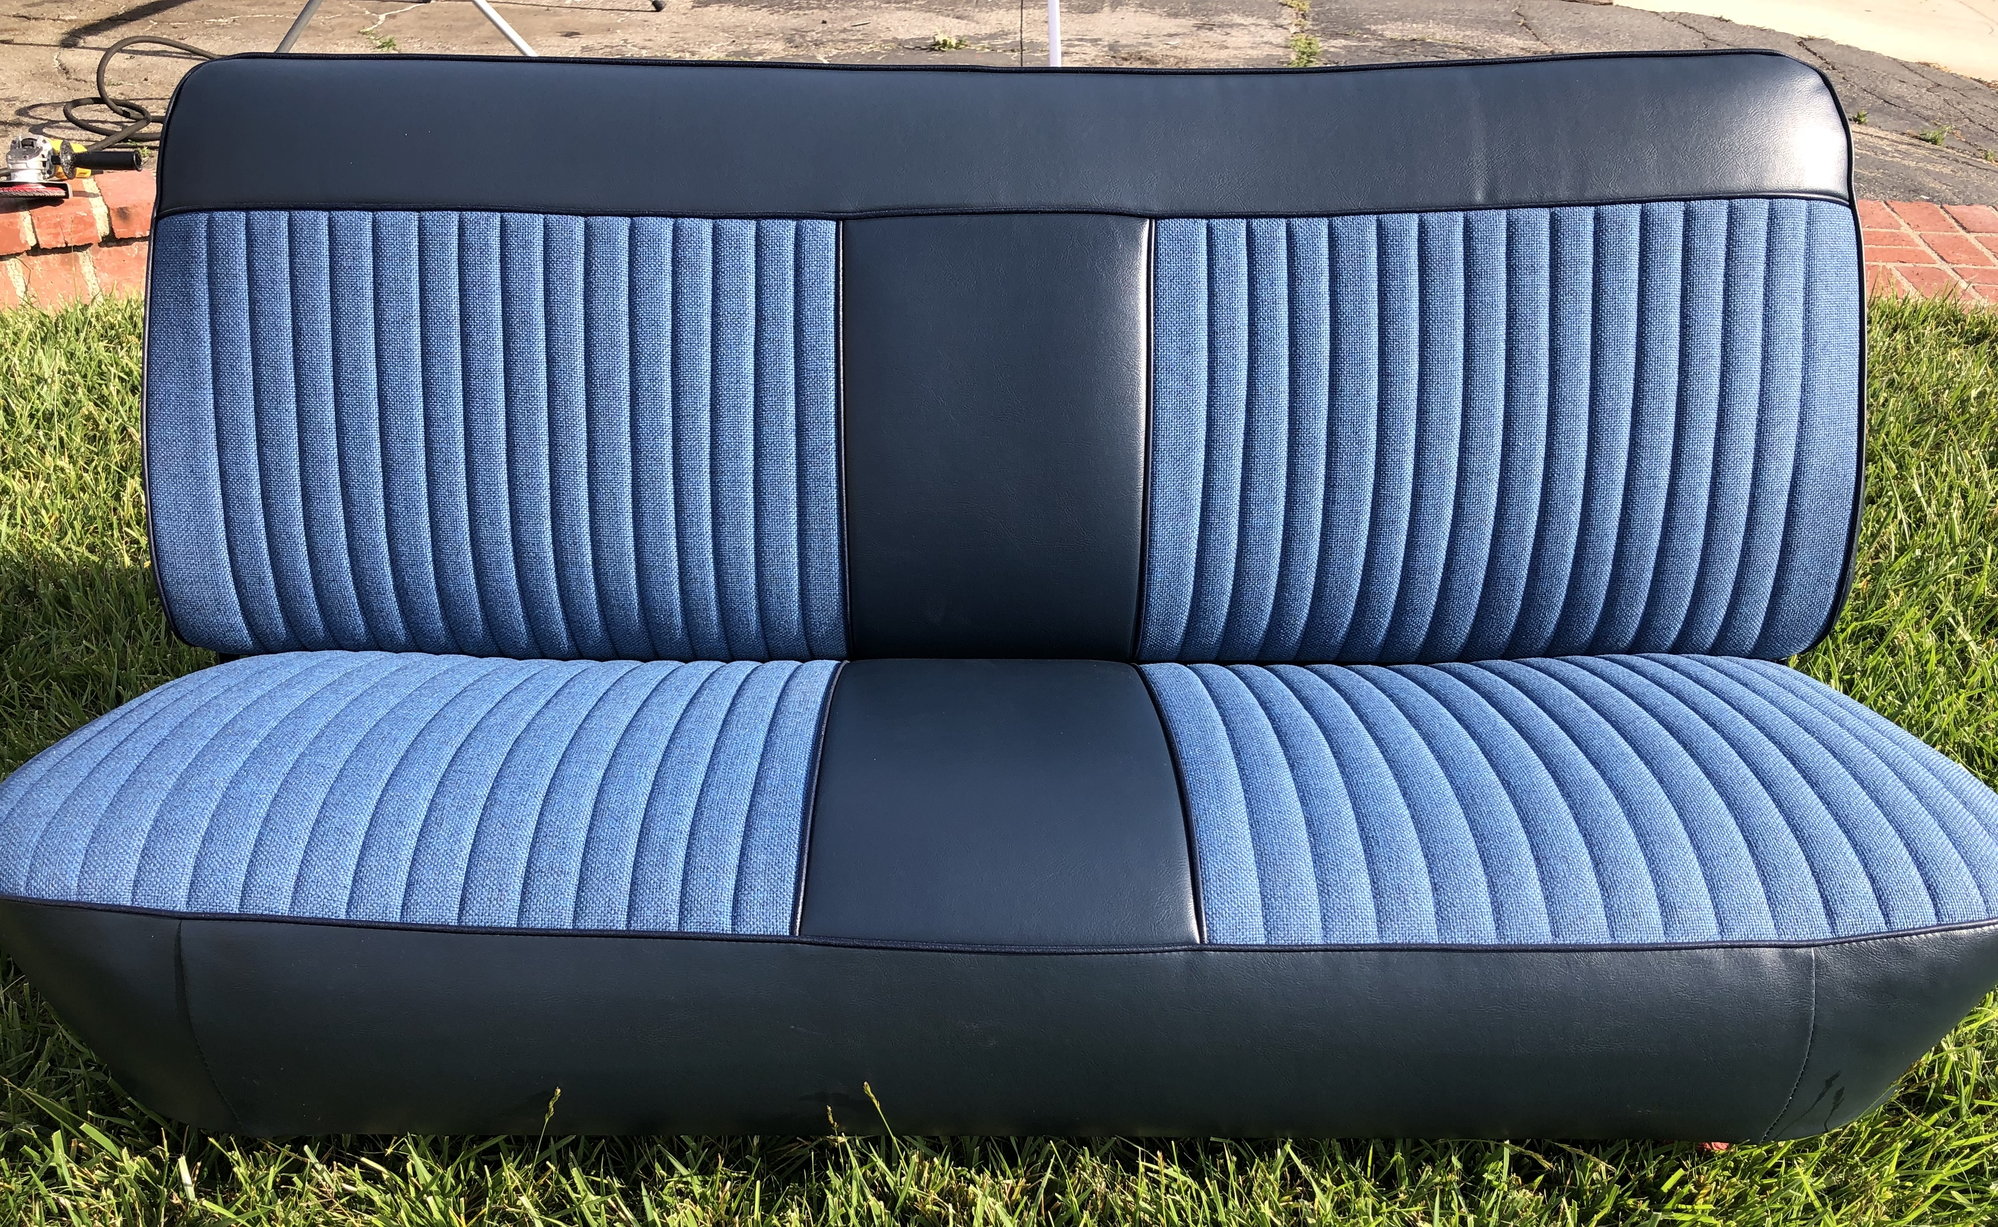 1962 F100 Bench Seat Restore - Ford Truck Enthusiasts Forums